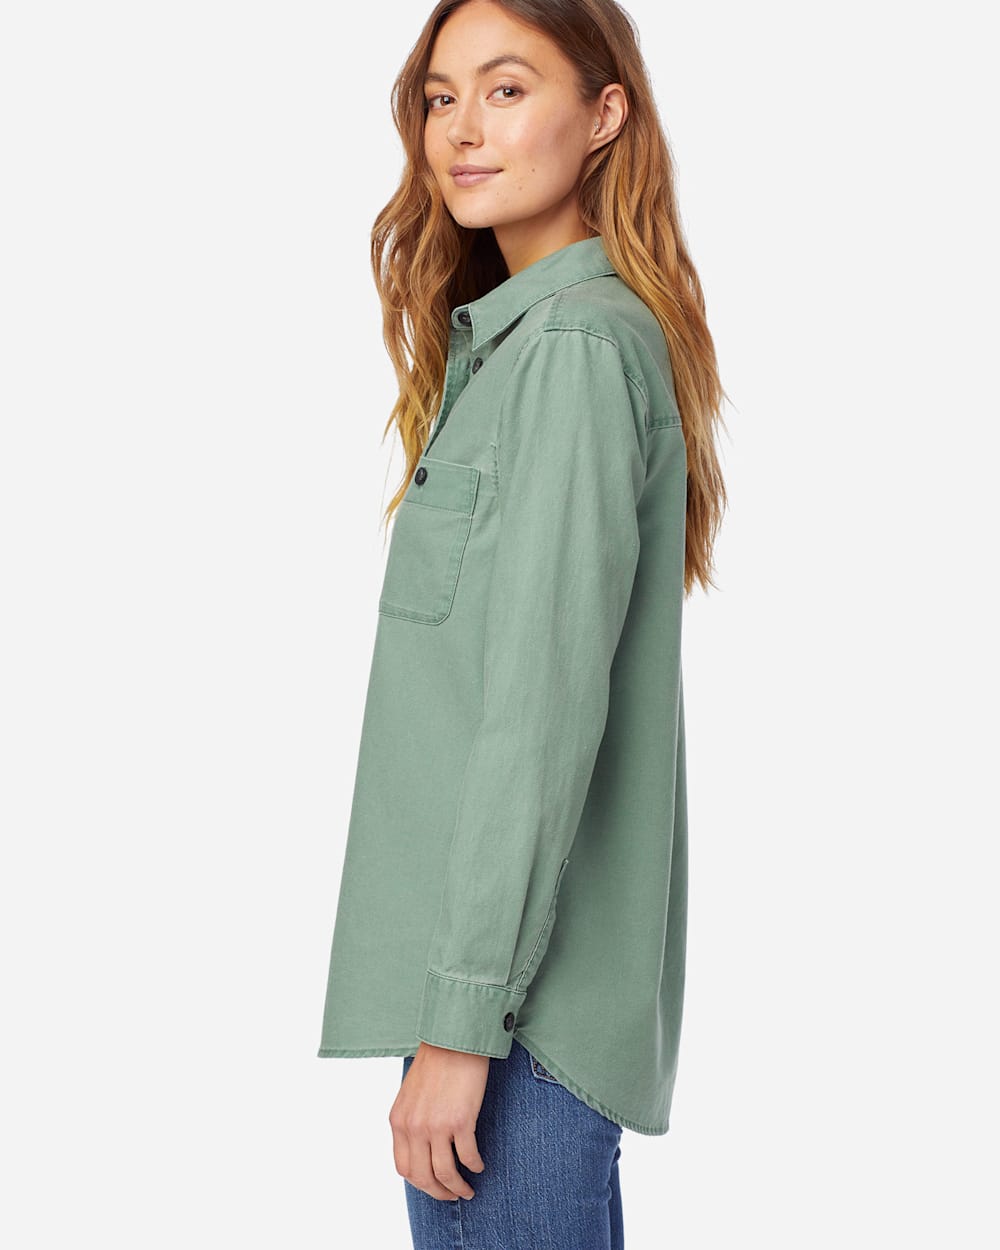 WOMEN'S BEACH SHACK SHIRT IN SPRUCE GREEN image number 2